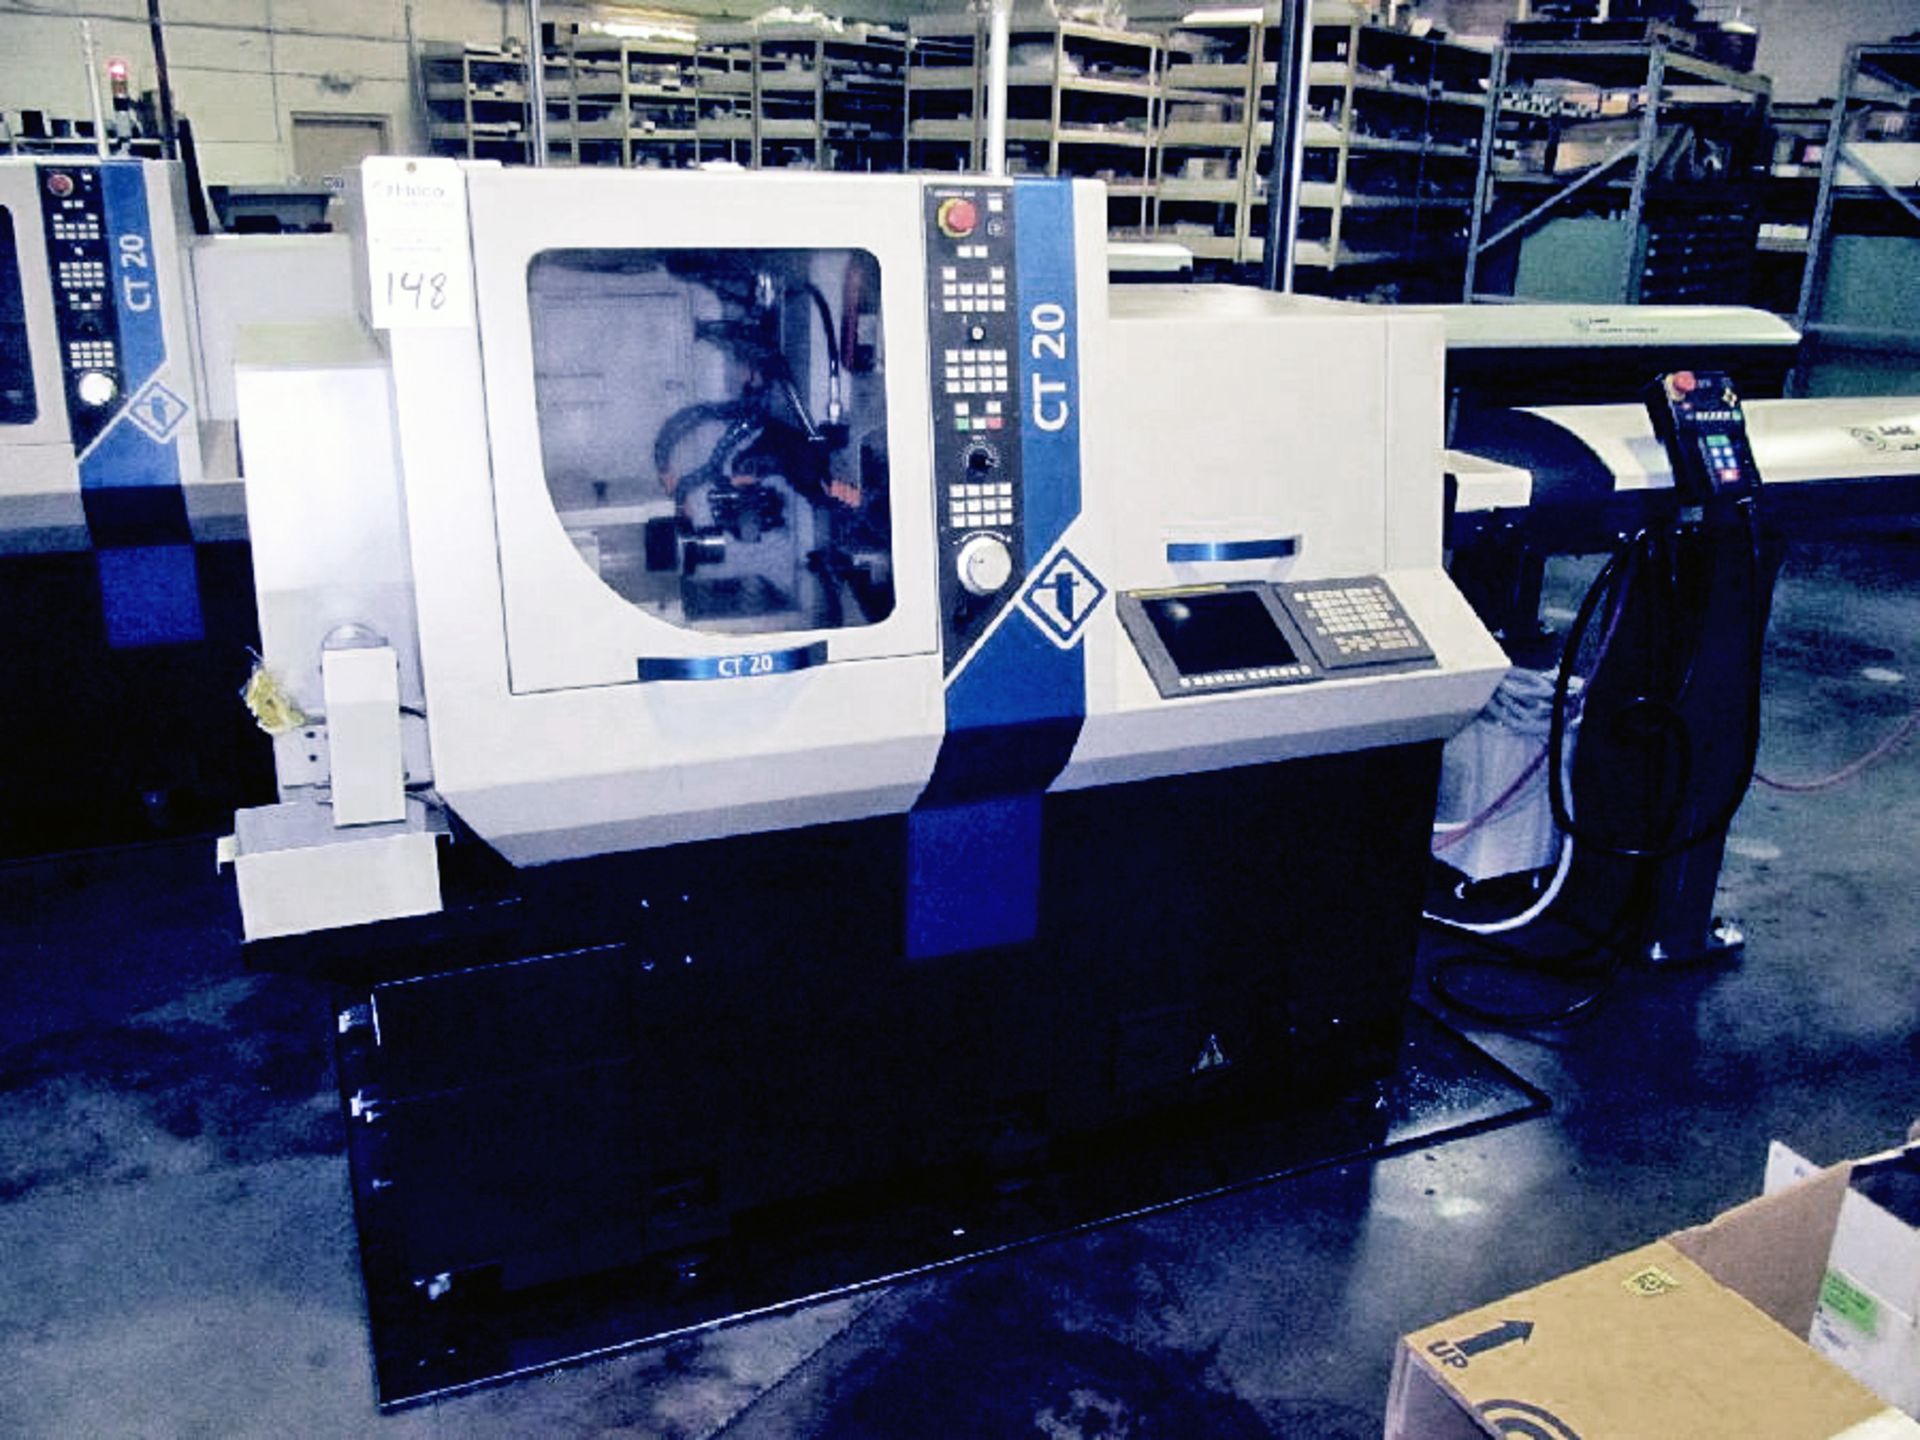 Tornos Model CT 20 7-Axis CNC Swiss-Type Lathe - Image 25 of 25